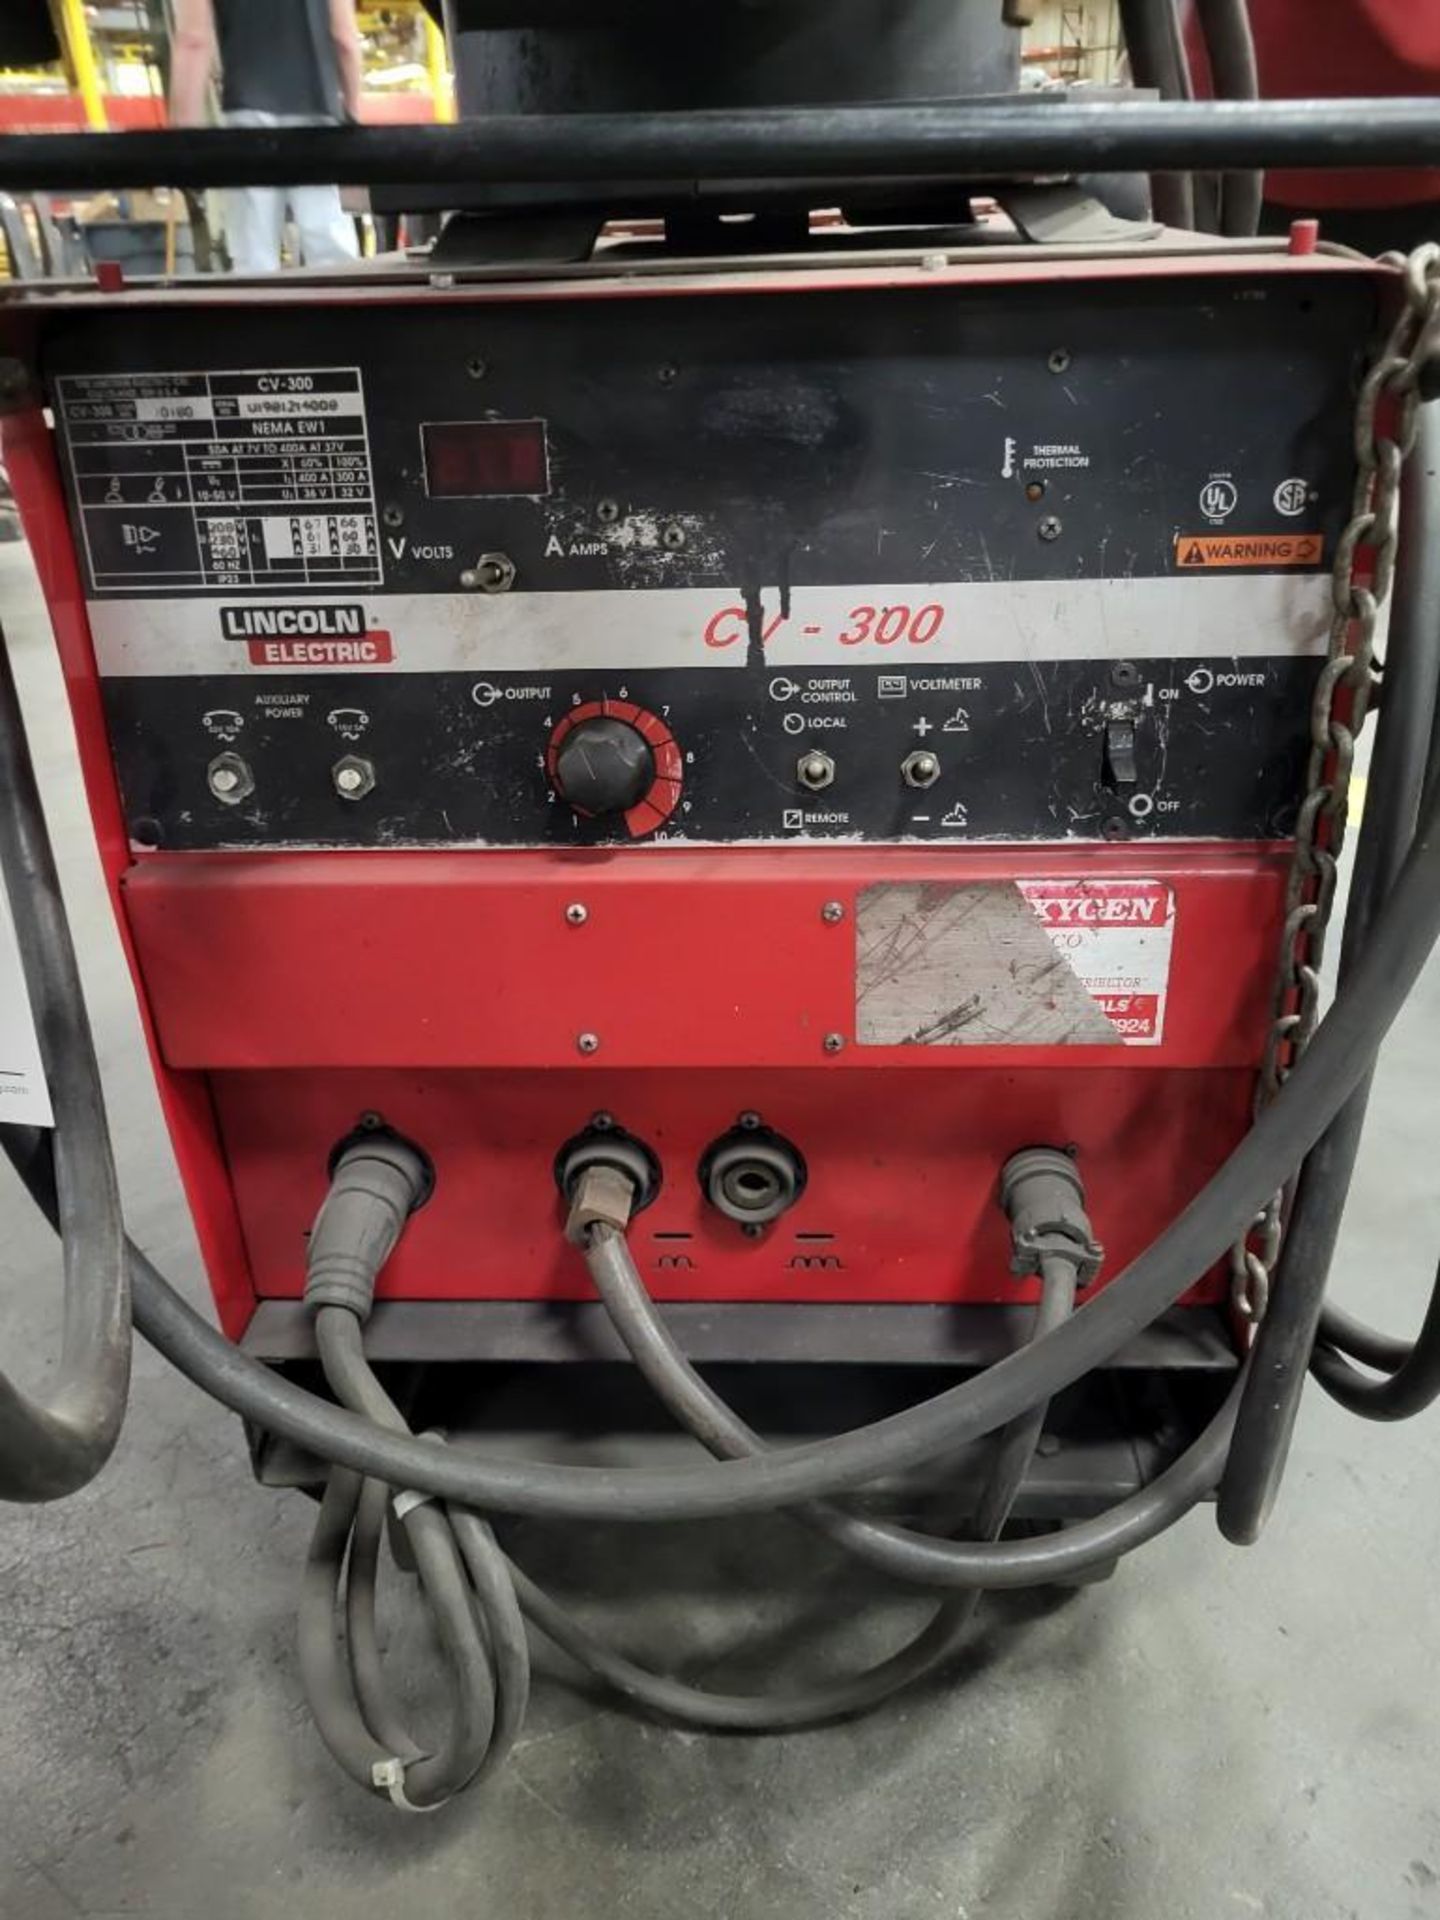 LINCOLN ELECTRIC CV-300 MIG WELDER WITH LN-7 WIRE FEEDER - Image 7 of 9